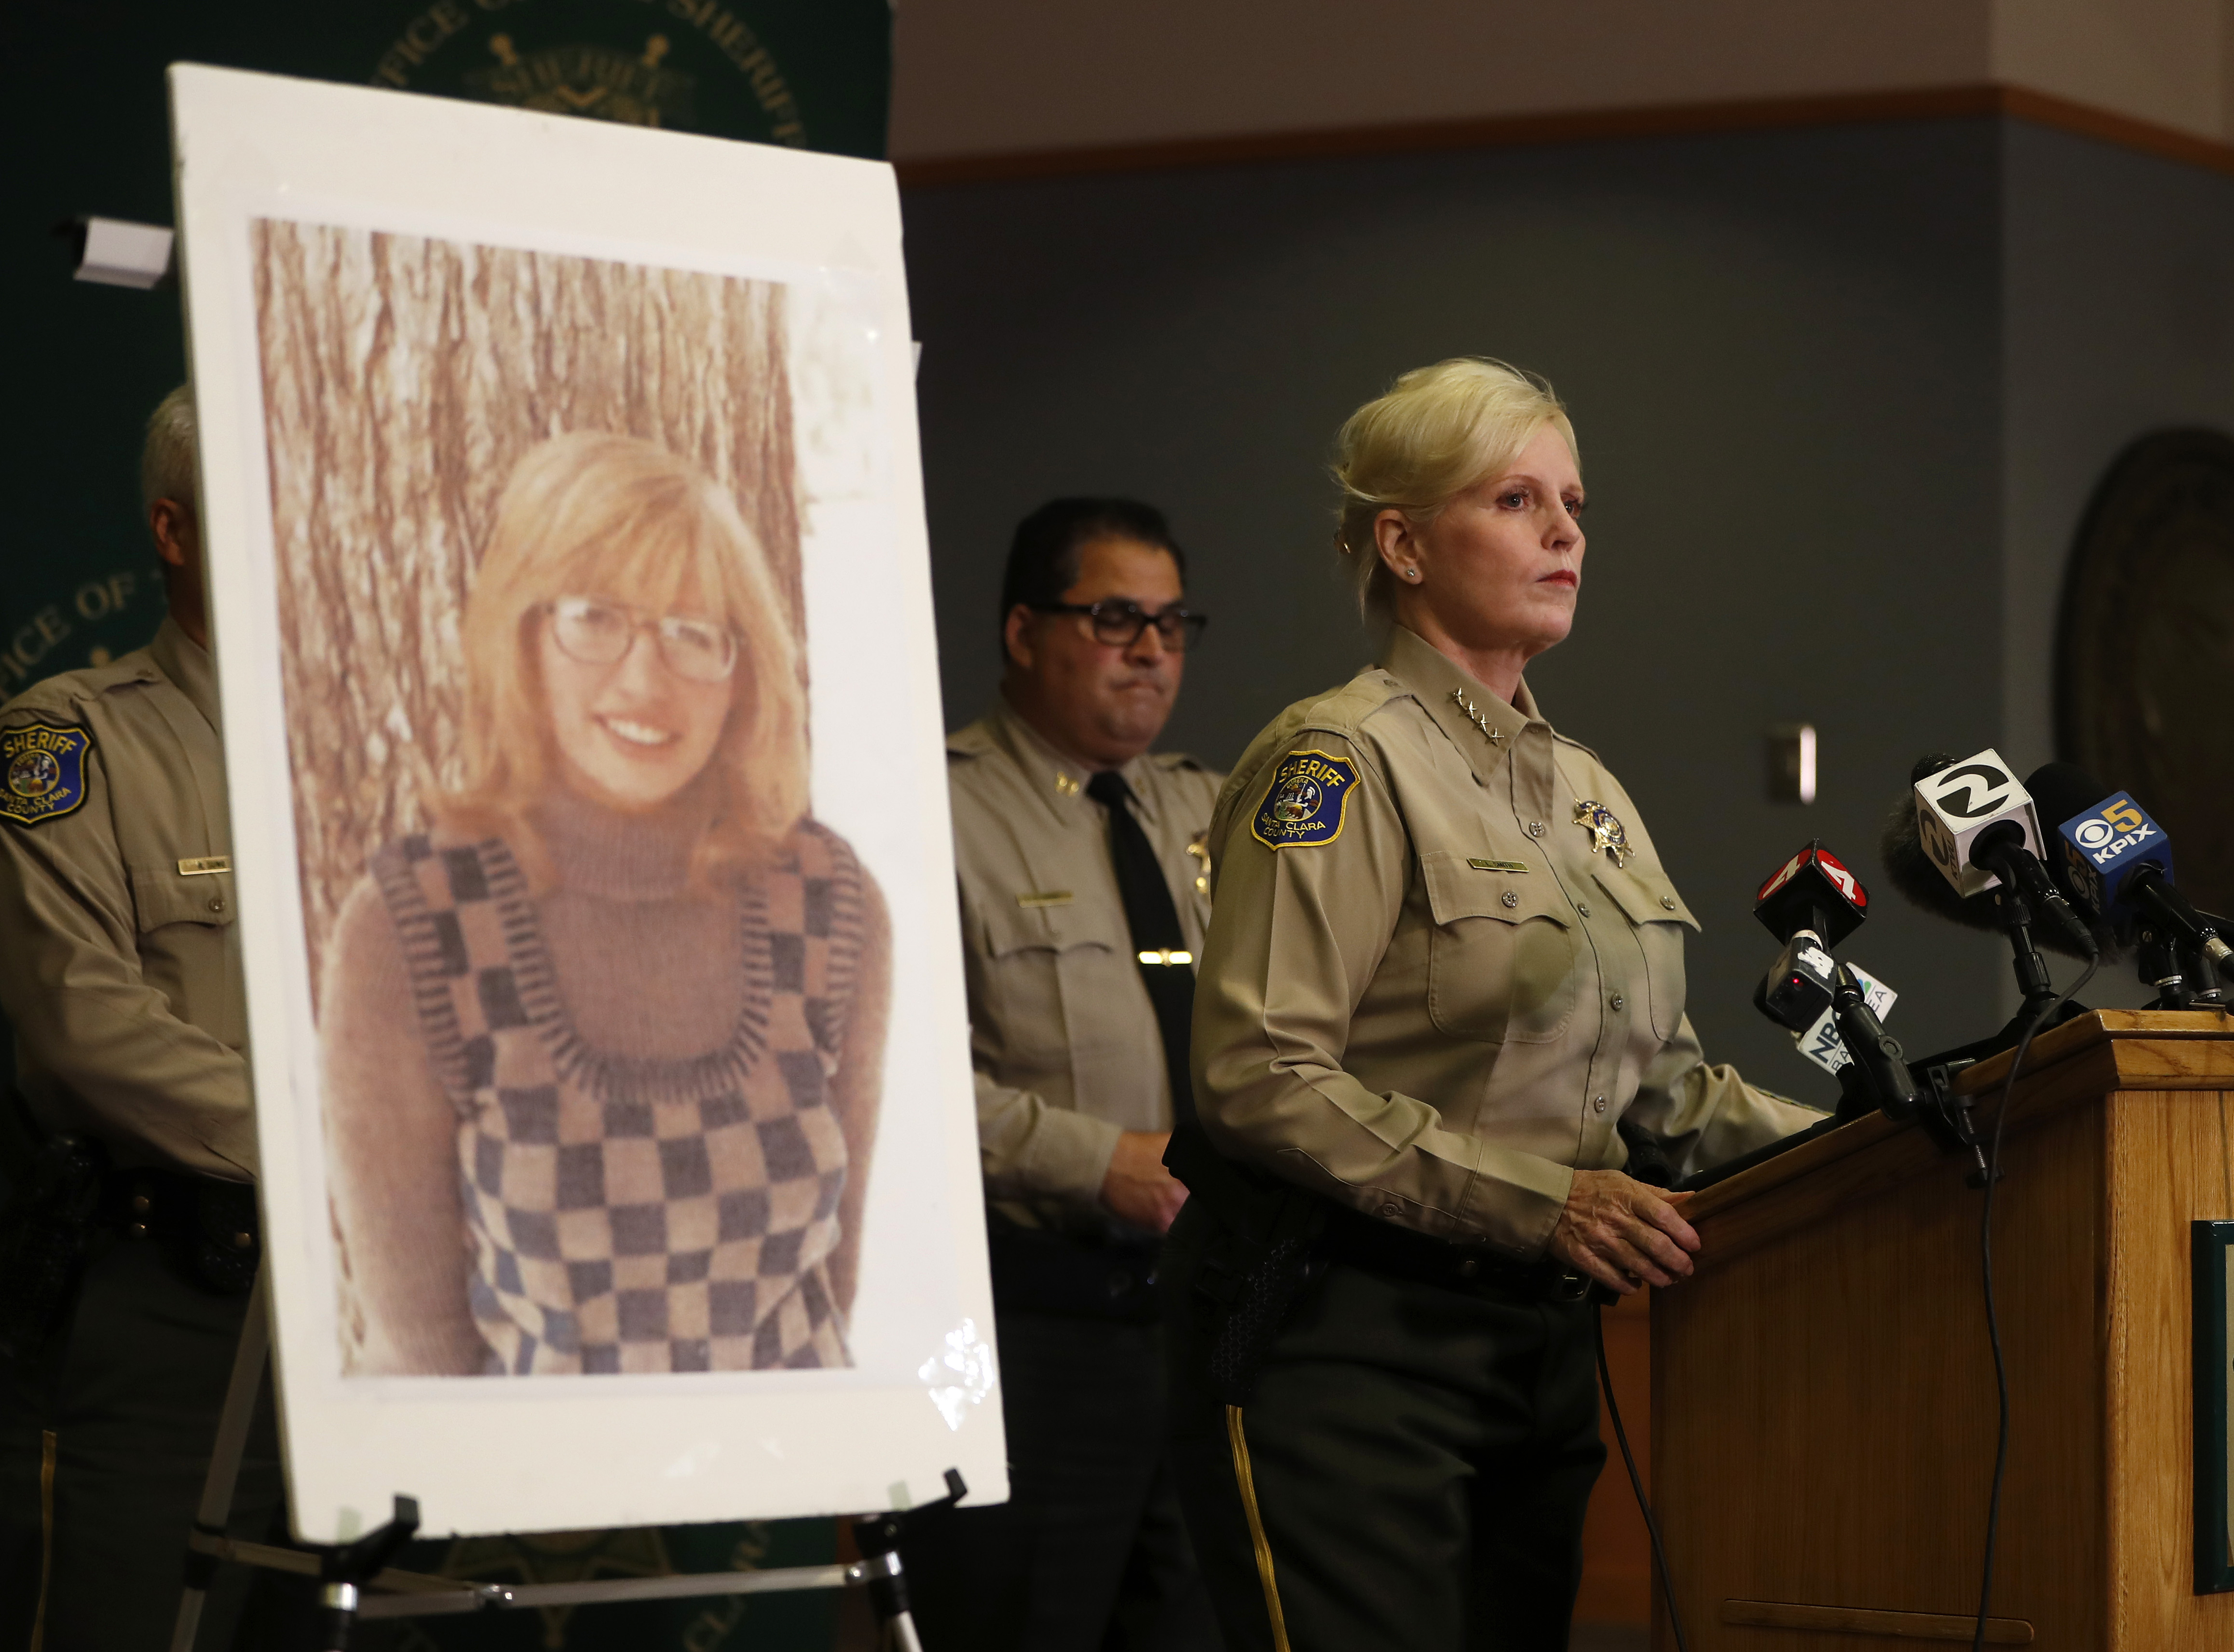 Santa Clara County Sheriff Laurie Smith speaks to the media about the 1974 killing of Arlis Perry, photograph at left, at the Sheriff's office in San Jose, Calif., on Thursday, June 28, 2018.